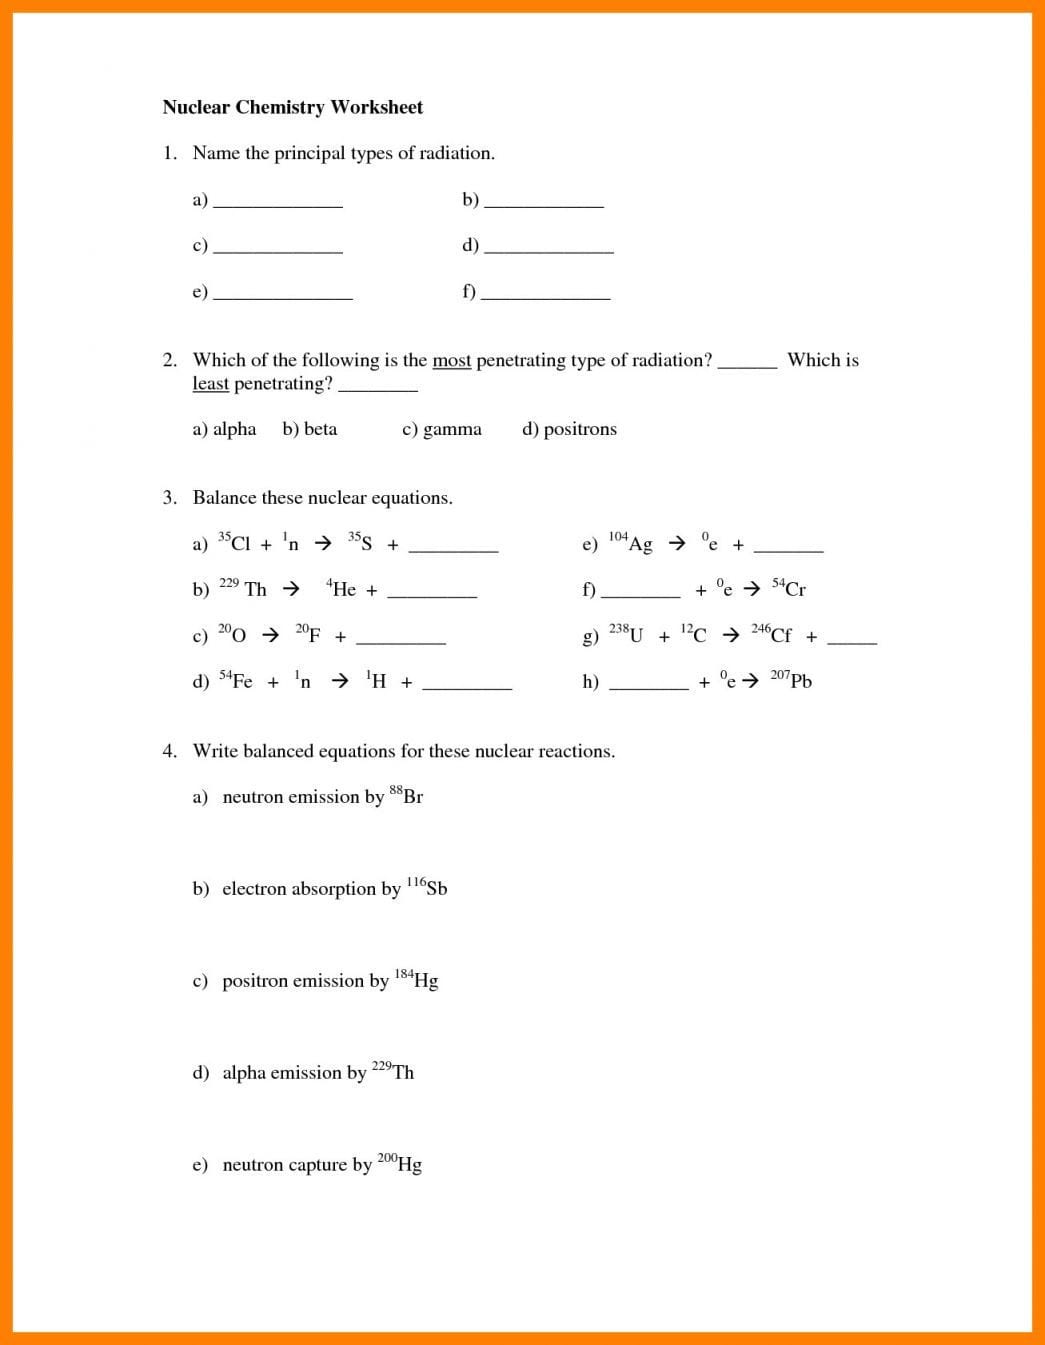 radioactive-decay-webquest-worksheet-answers-db-excel